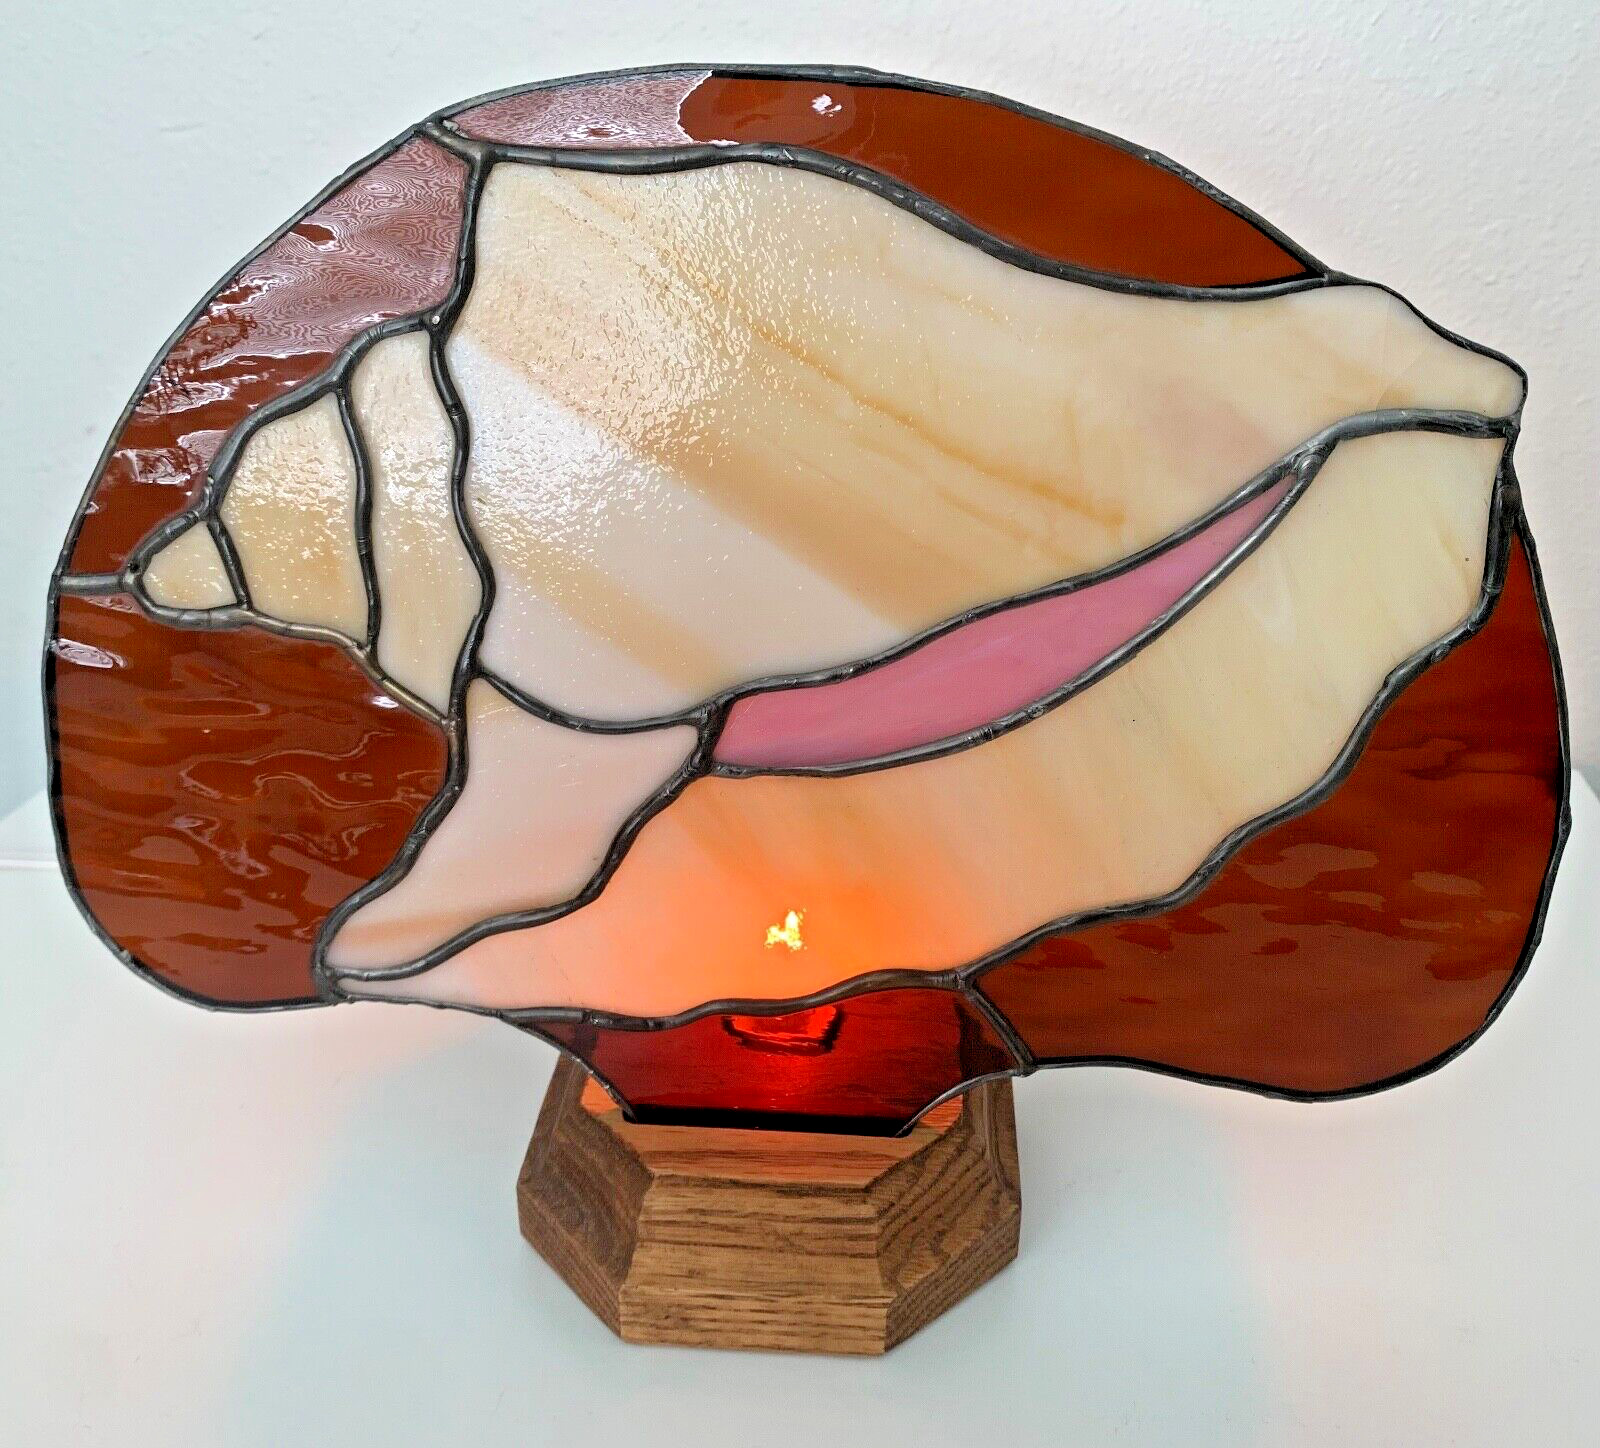 Seashell Stained Glass Night Light Lamp With Wood Base Stand